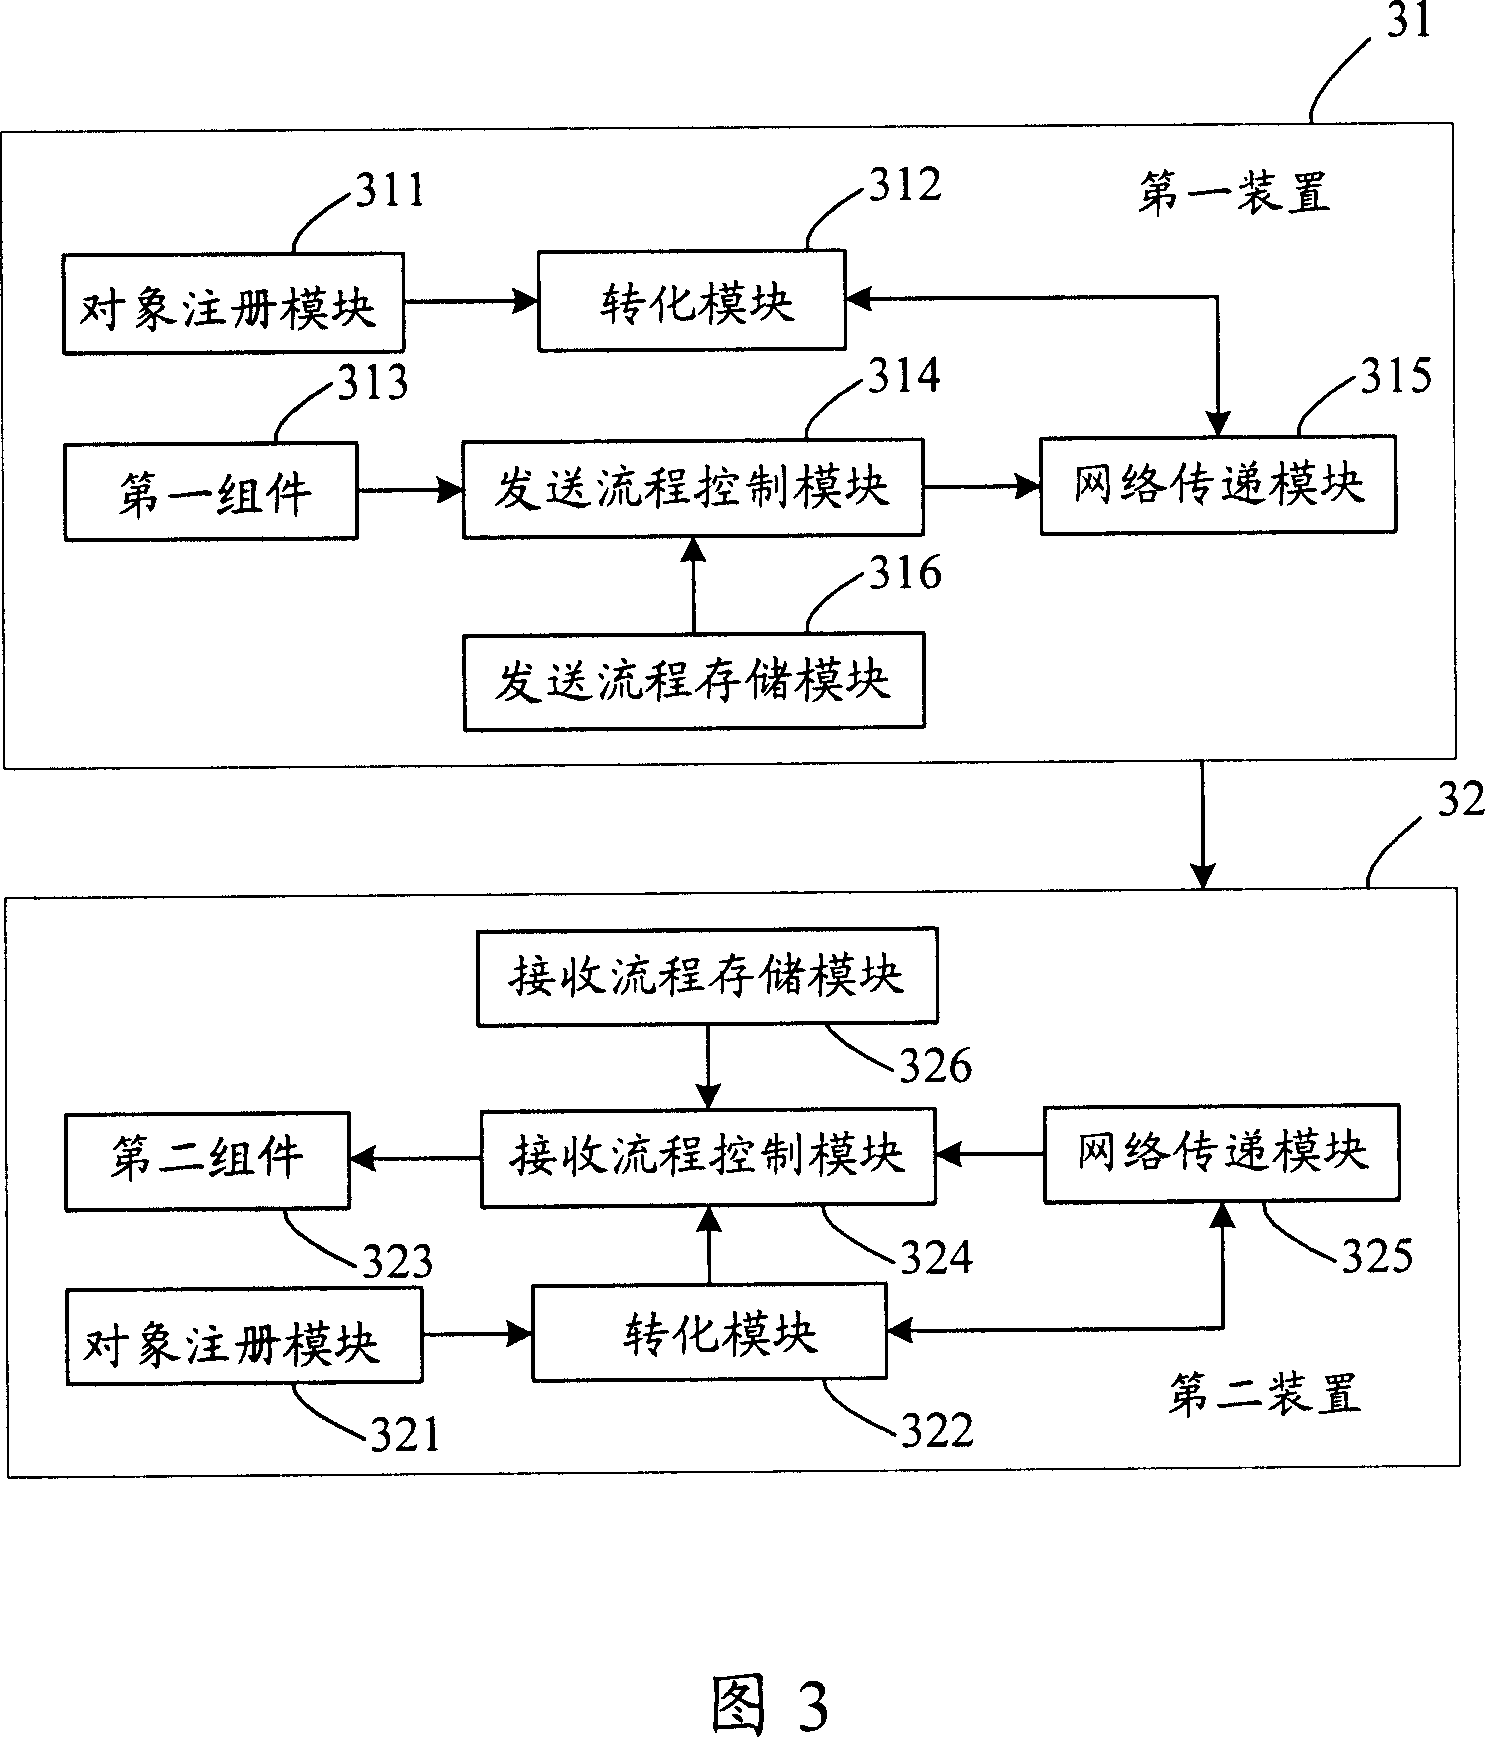 Object transmitting method, device and system